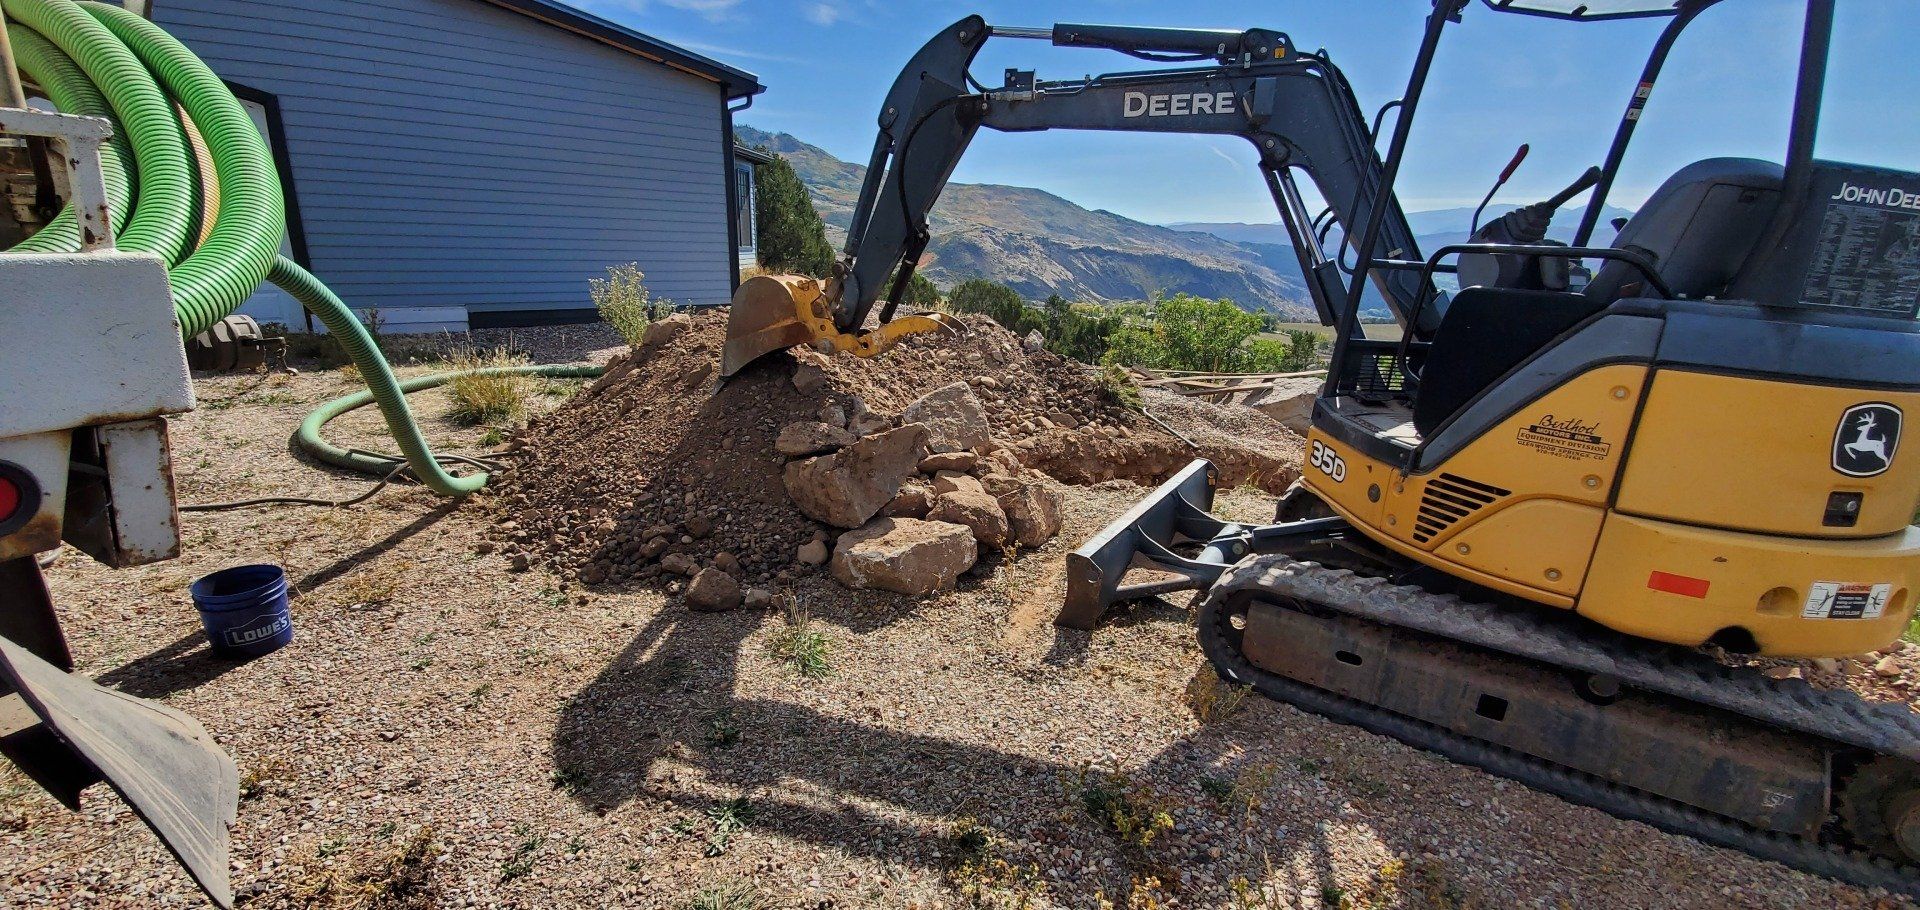 Septic tank well - Carbondale, CO - B&R Septic and Drain Service